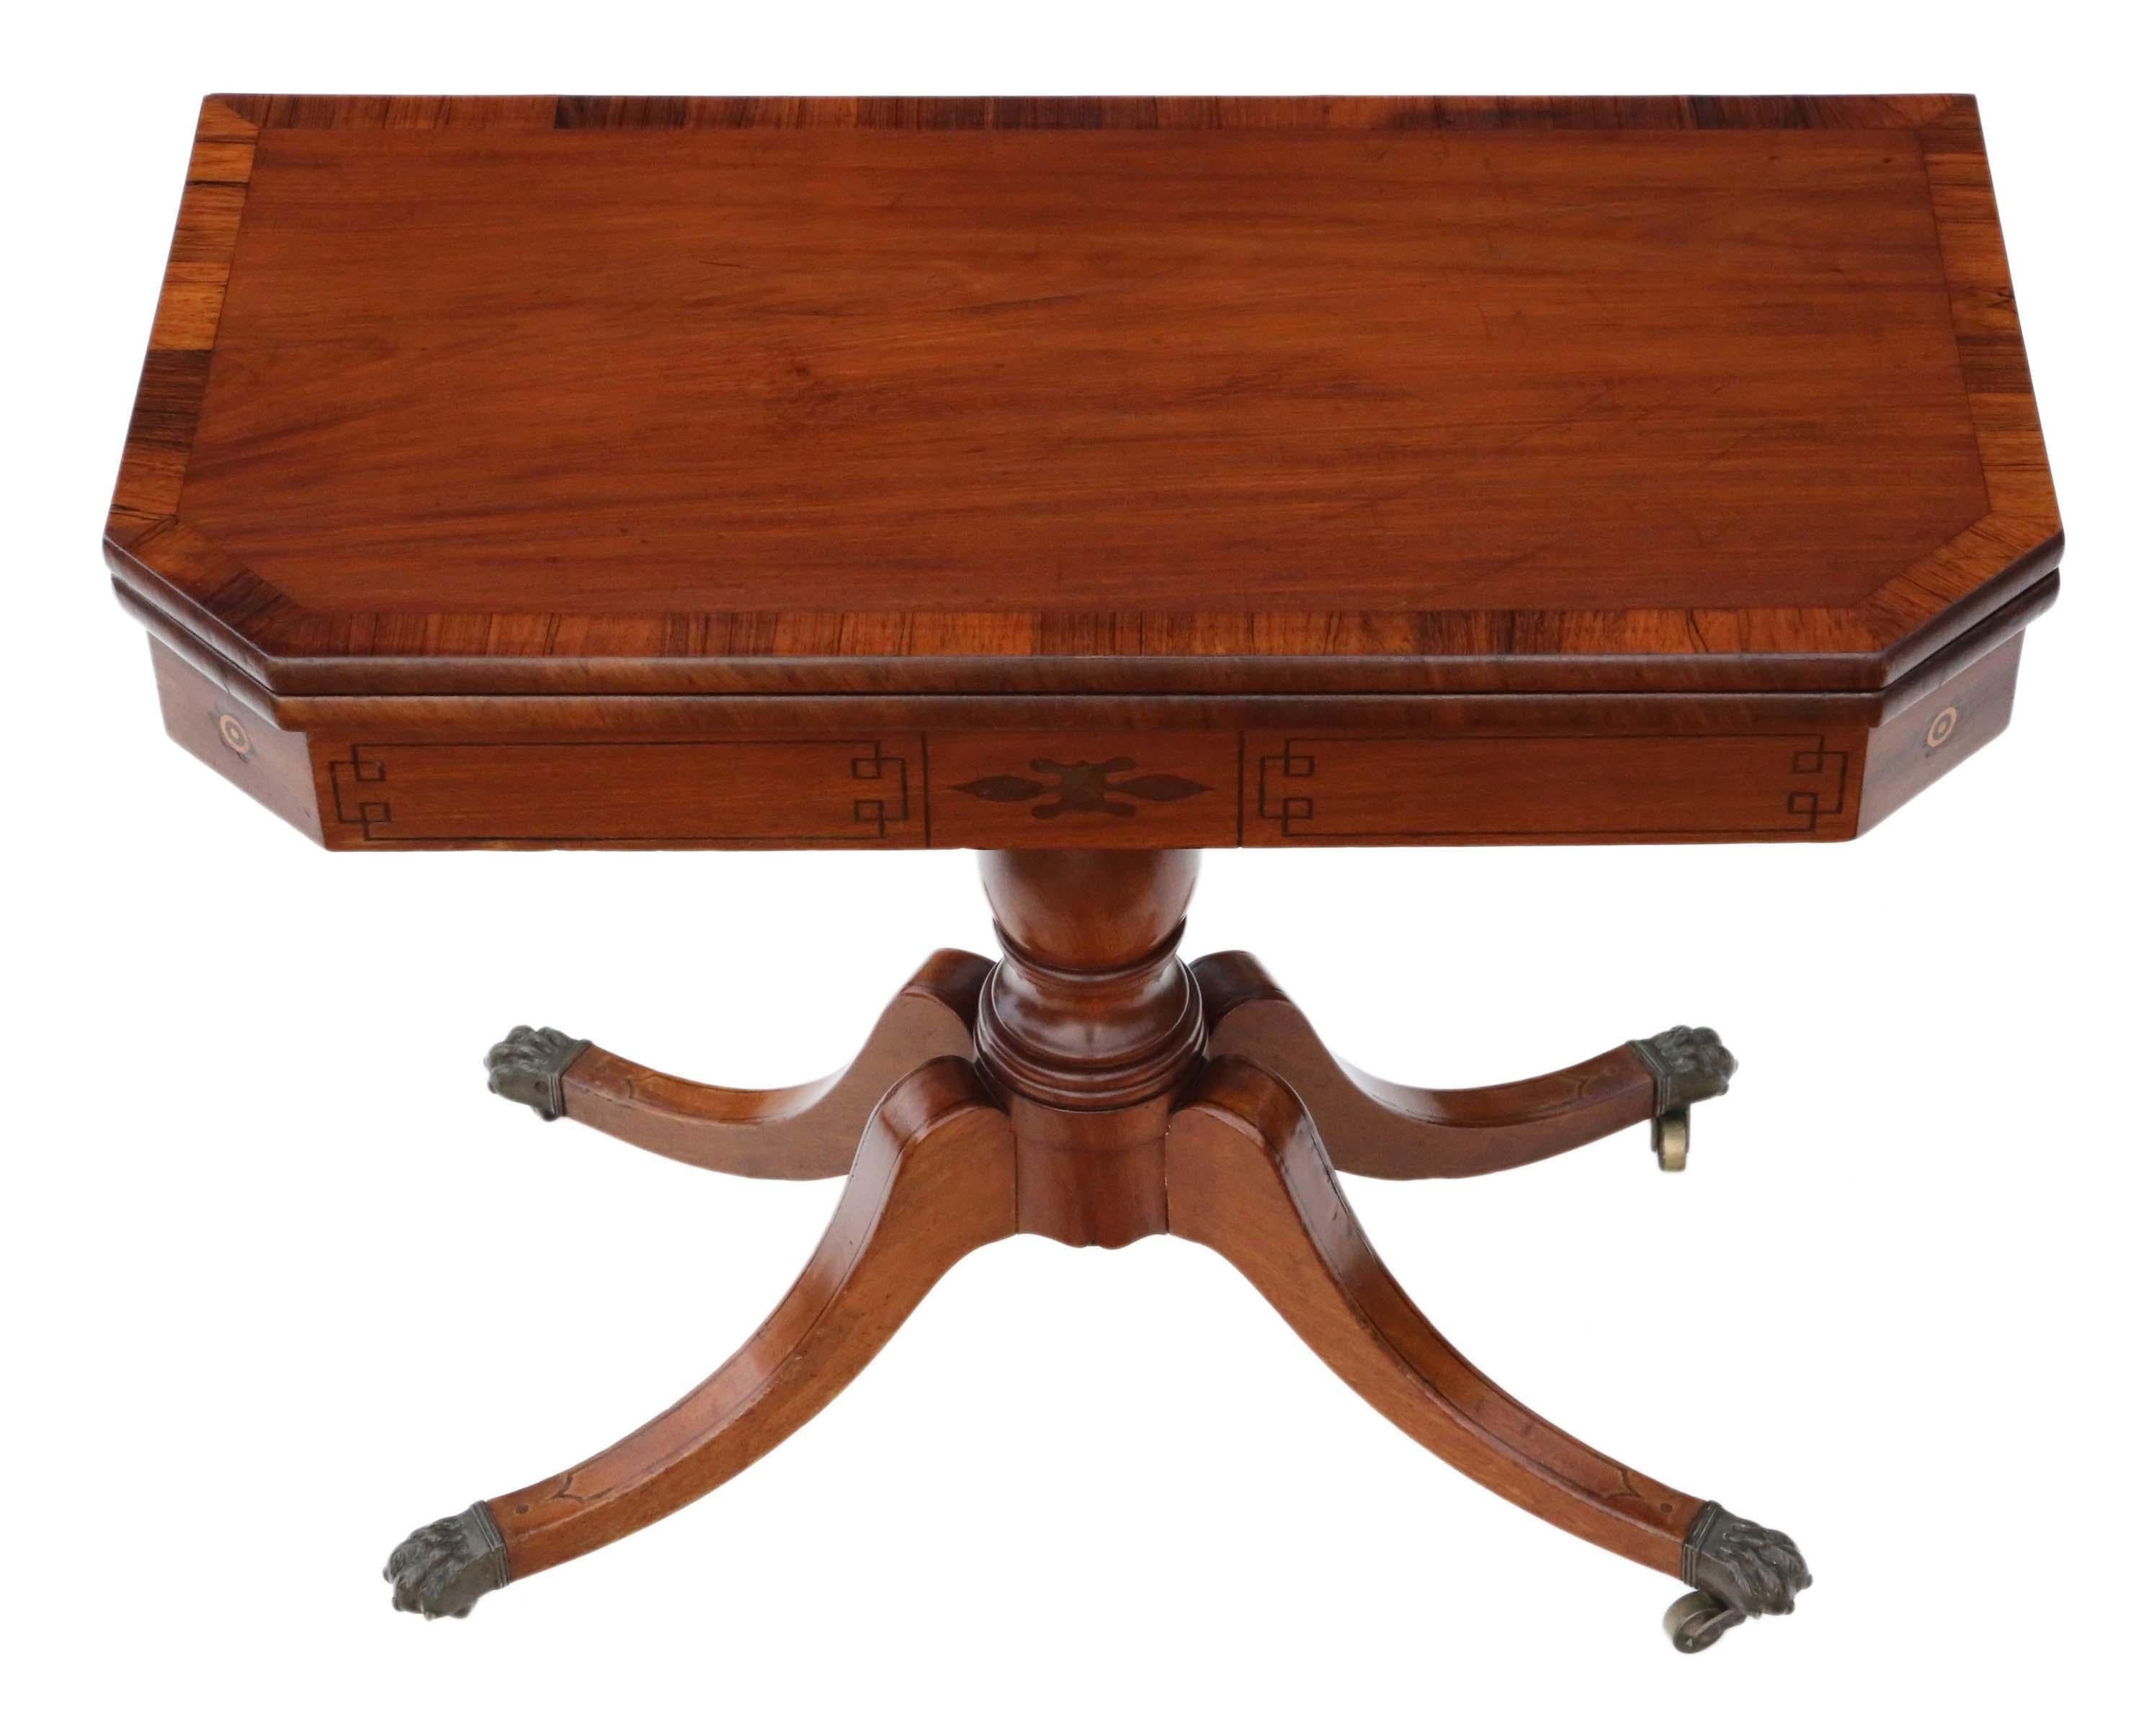 Presenting an antique Georgian folding tea table, crafted around 1810 from mahogany adorned with rosewood crossbanding. This versatile piece can also serve as an enchanting card or console table.

This exquisite table radiates with age, charm, and